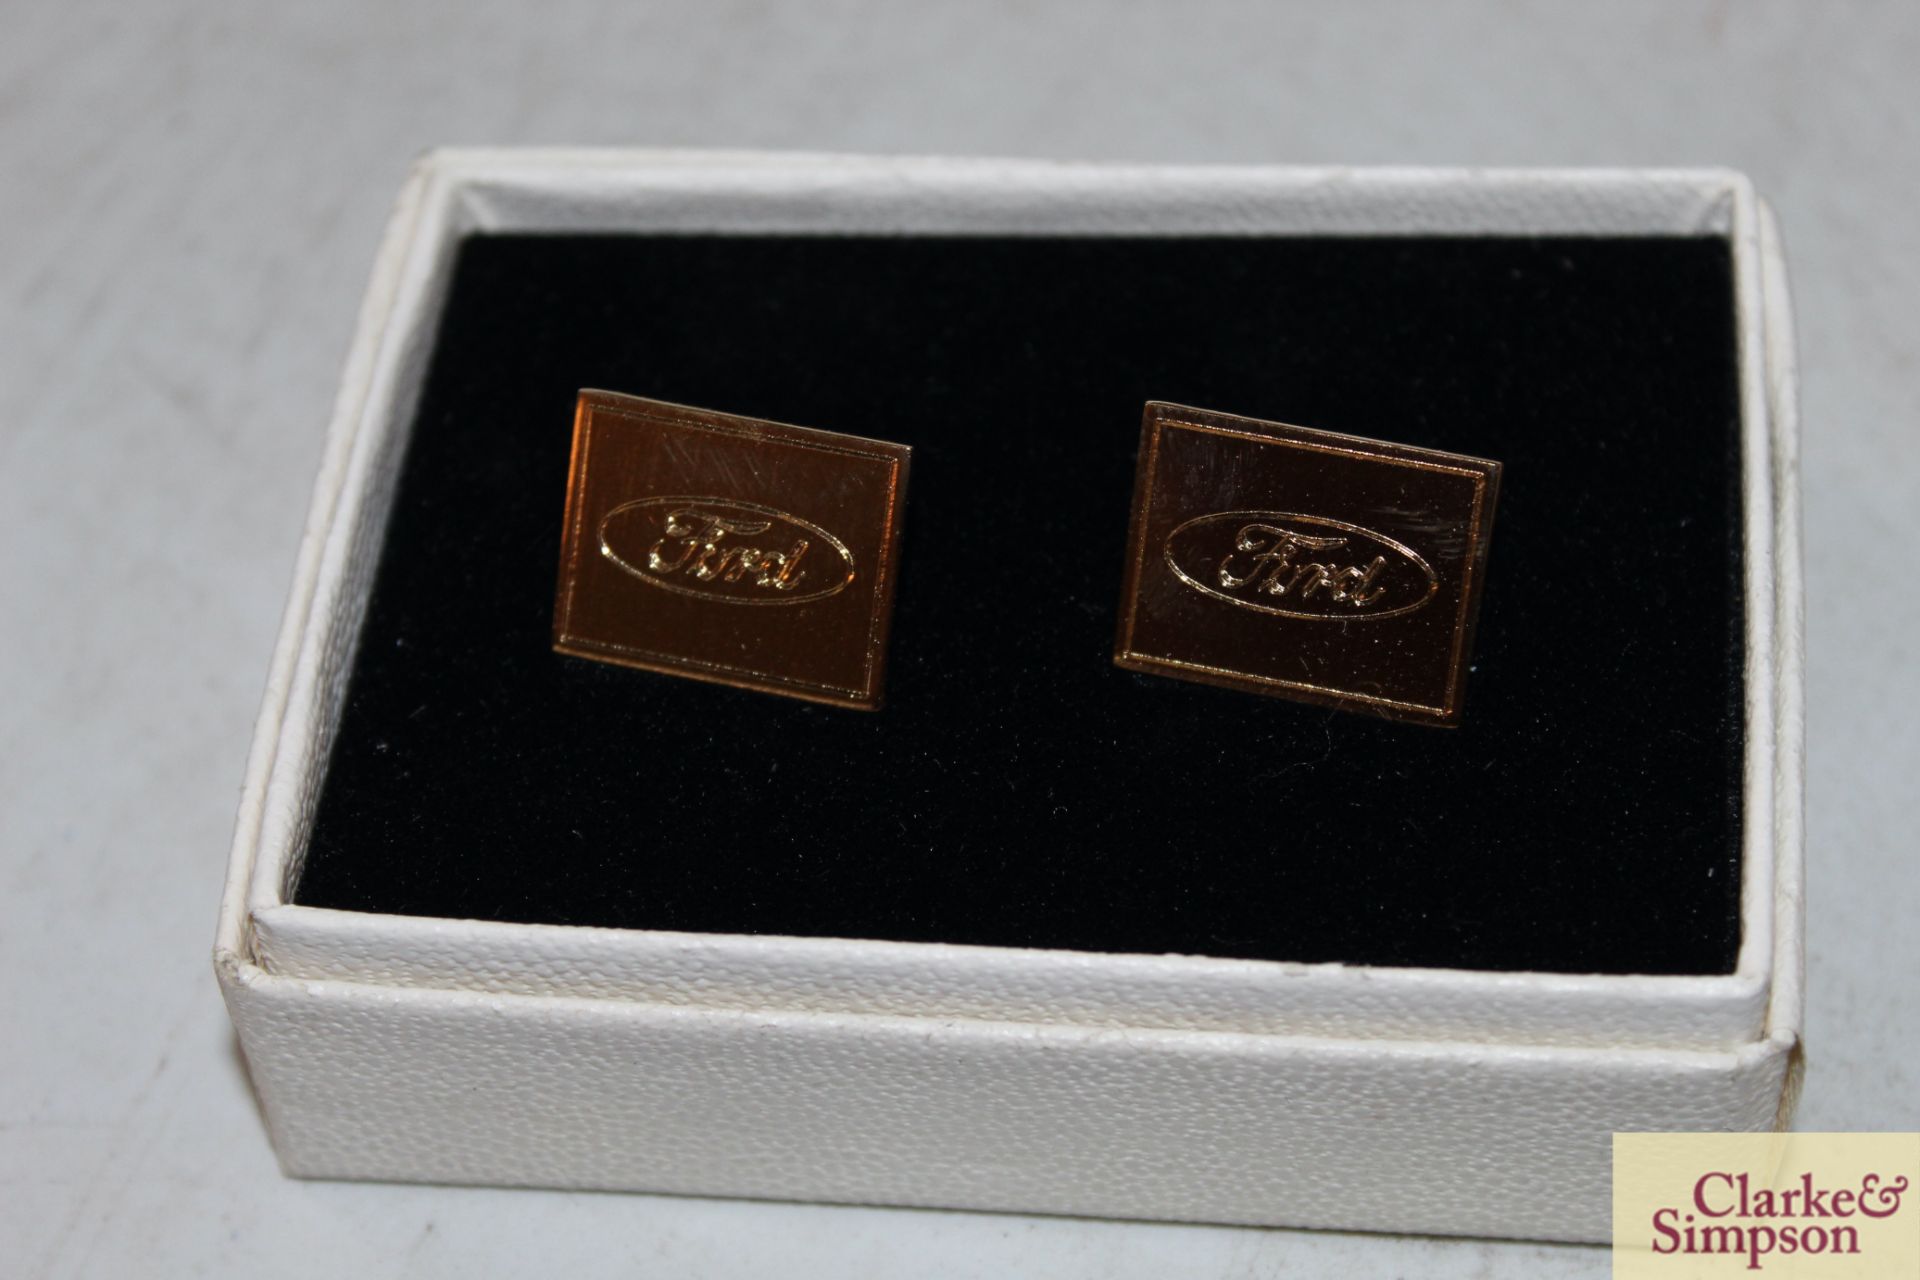 5x Ford lapel badges, 2x pairs of Ford cuff links, - Image 2 of 8